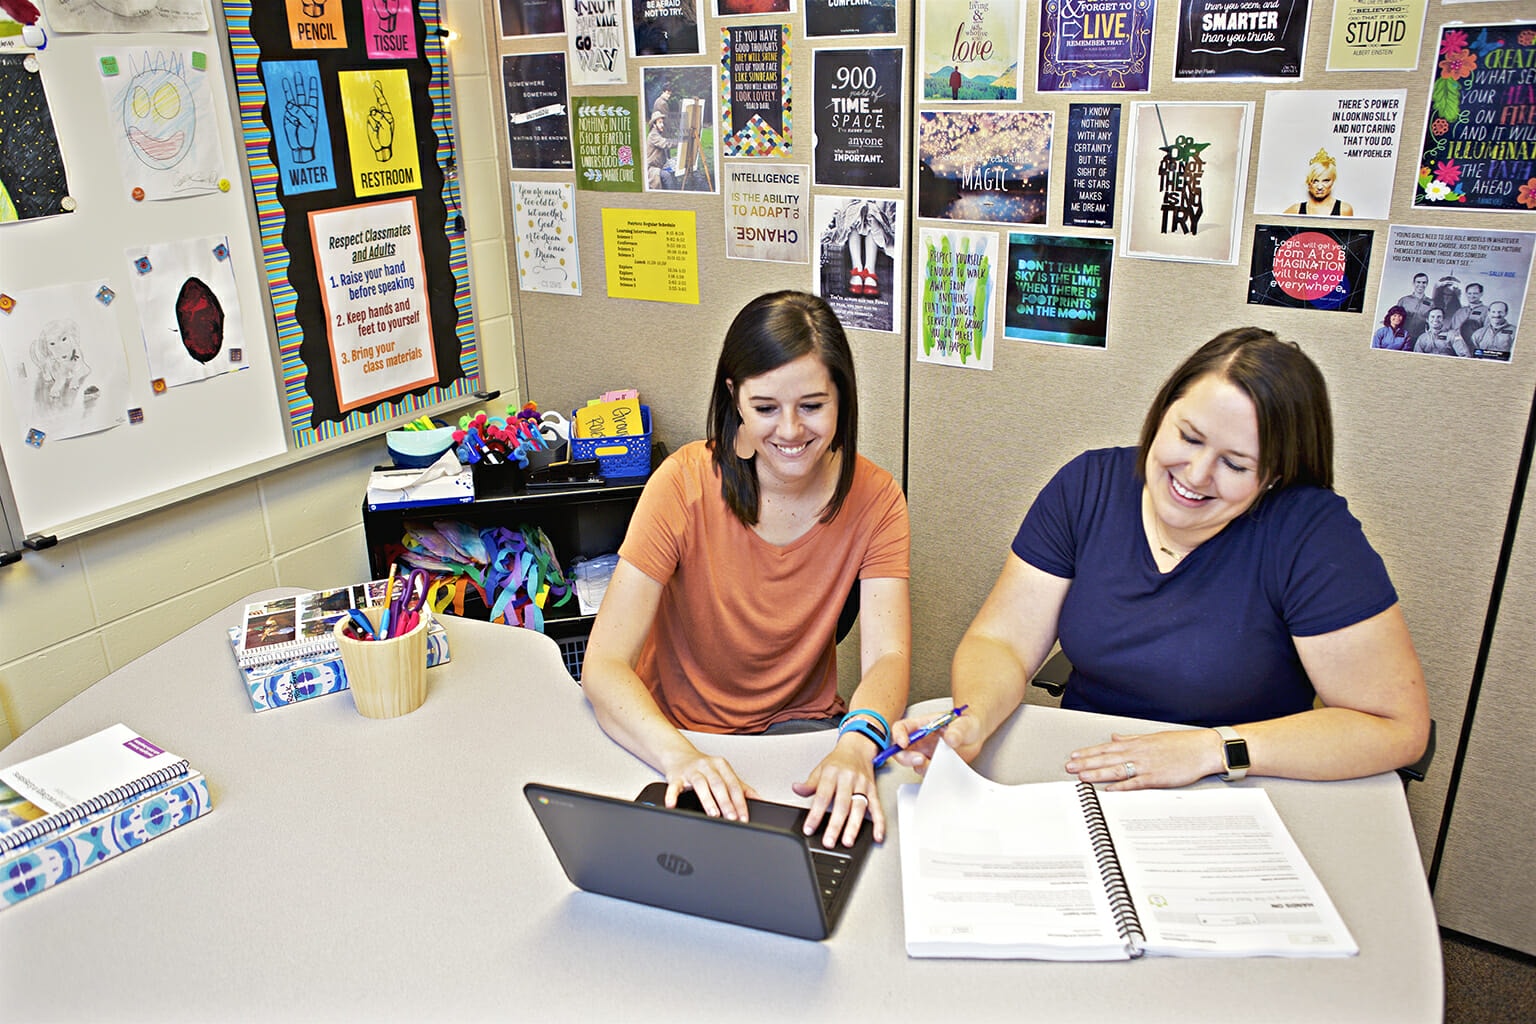 Two women smiling and working together at a desk with a laptop and notebook, surrounded by colorful posters on the walls.